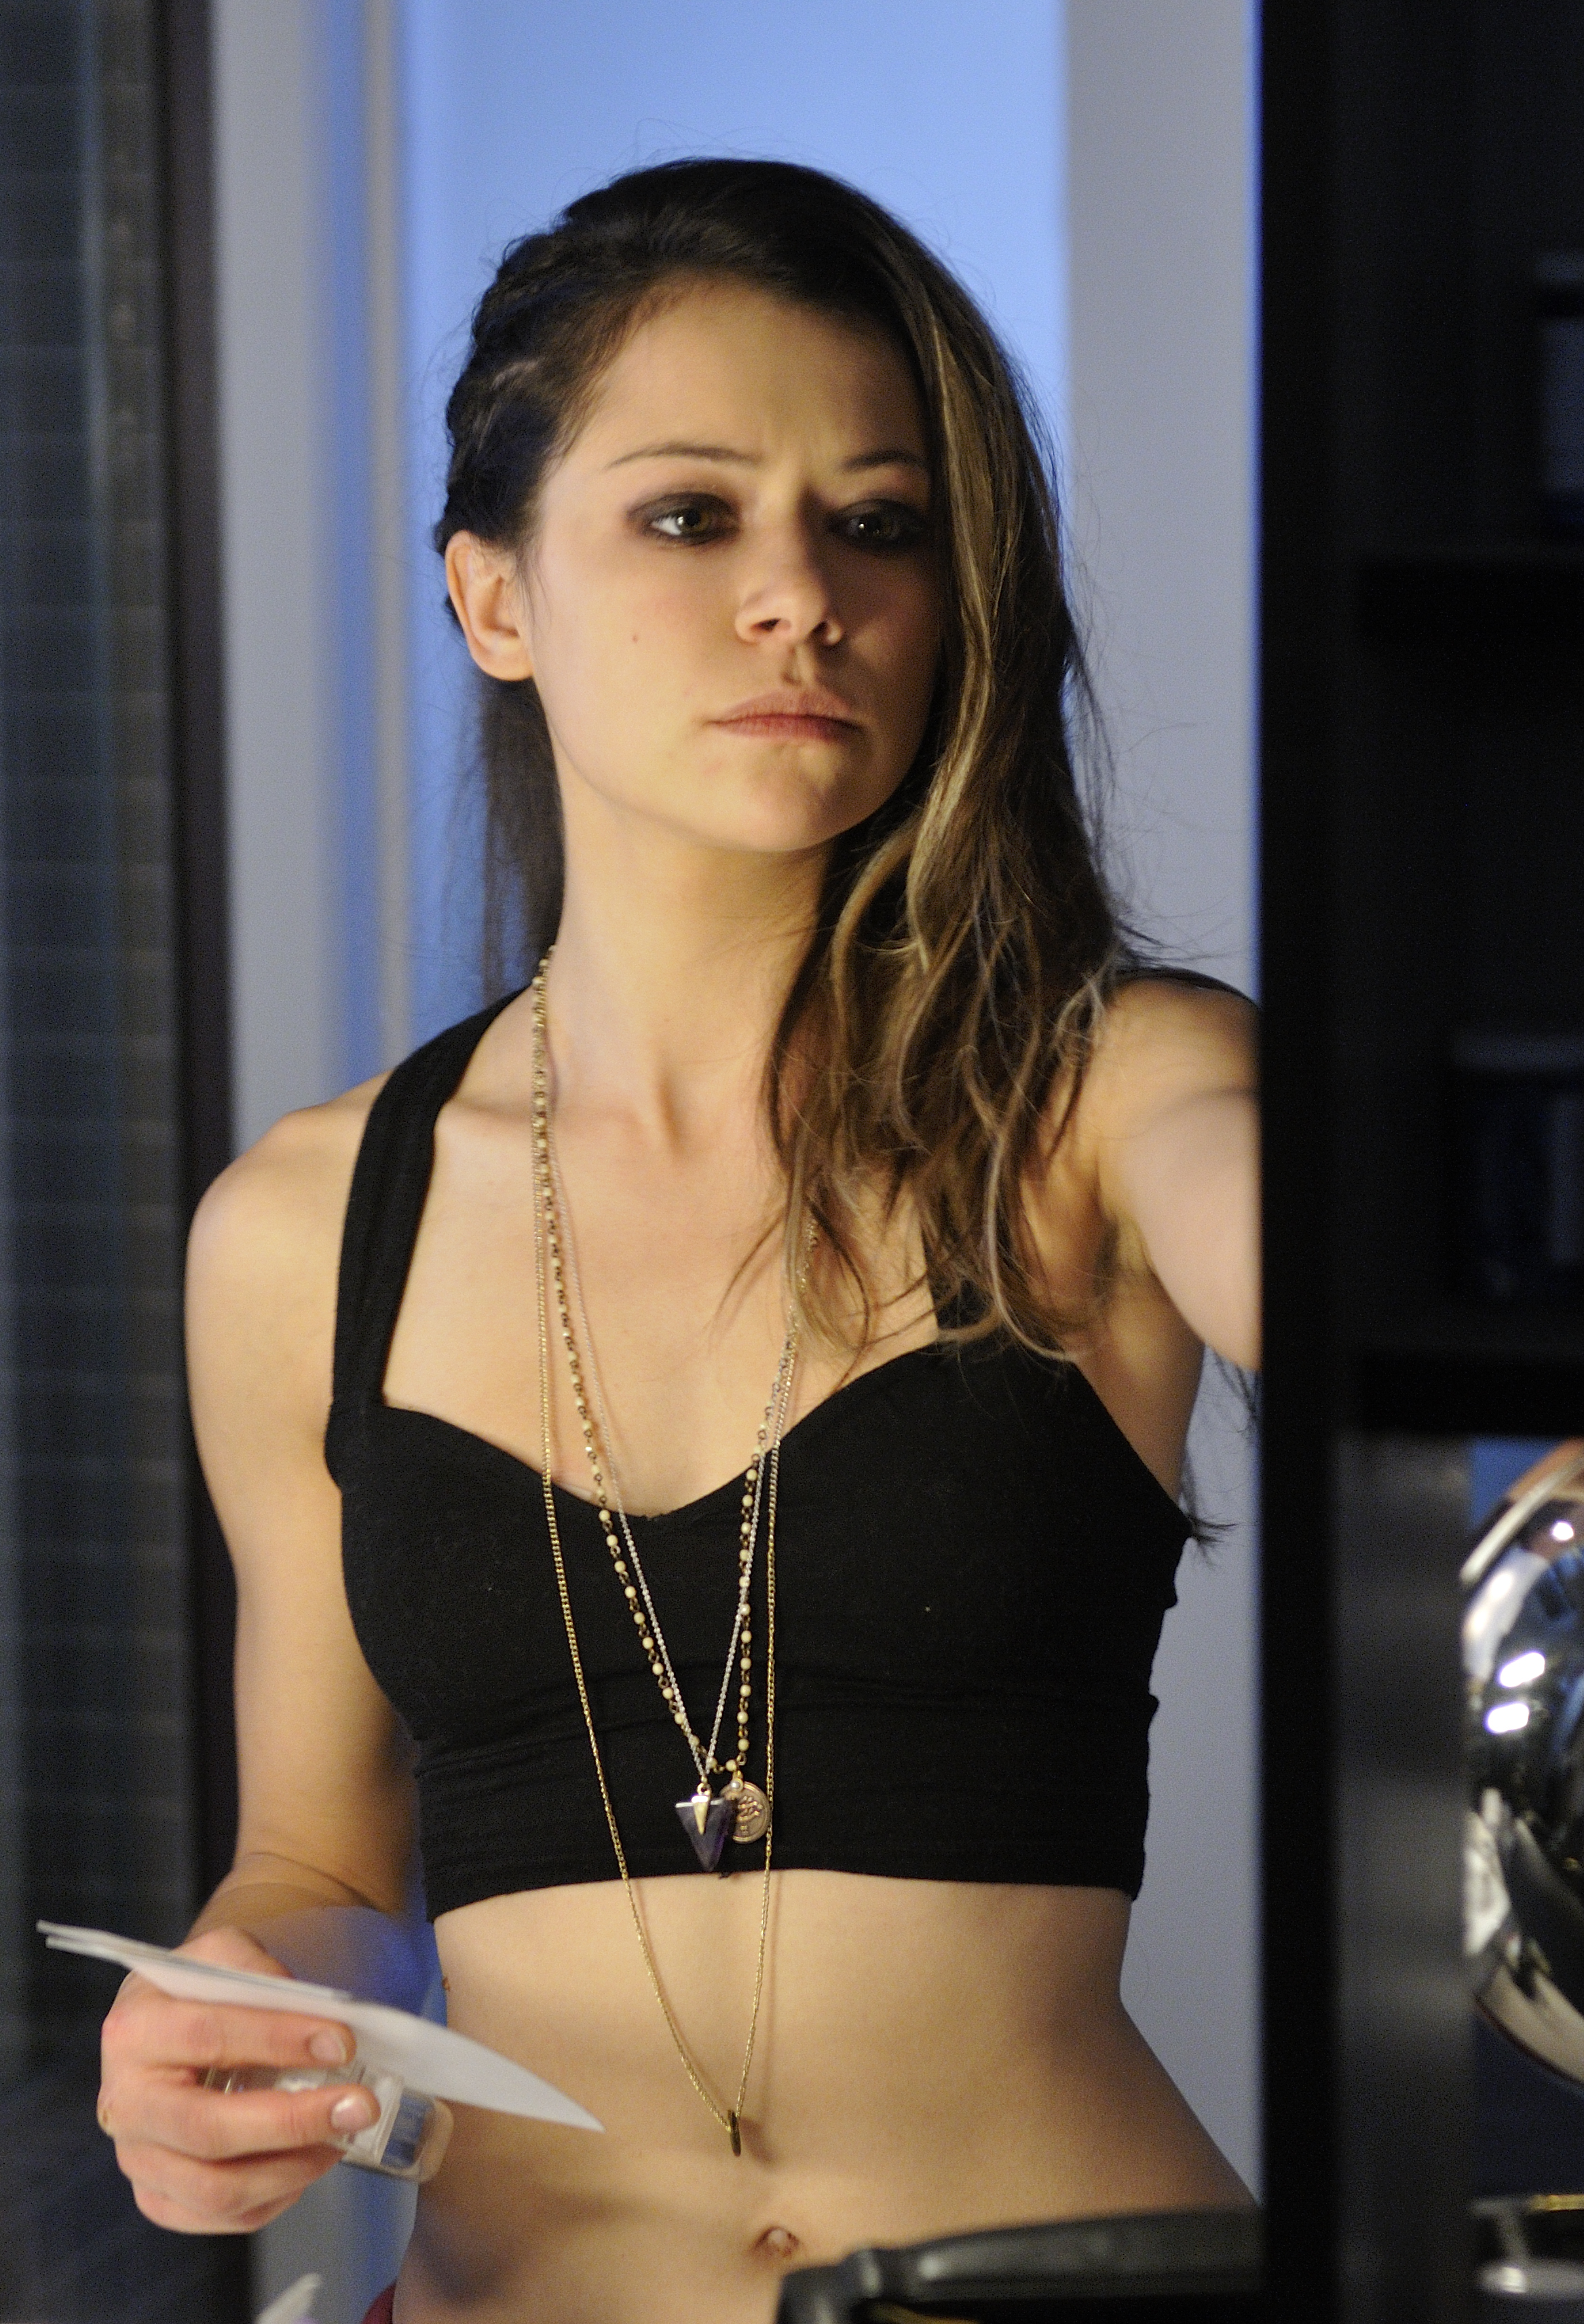 Tatiana Maslany Backgrounds, Compatible - PC, Mobile, Gadgets| 2334x3425 px